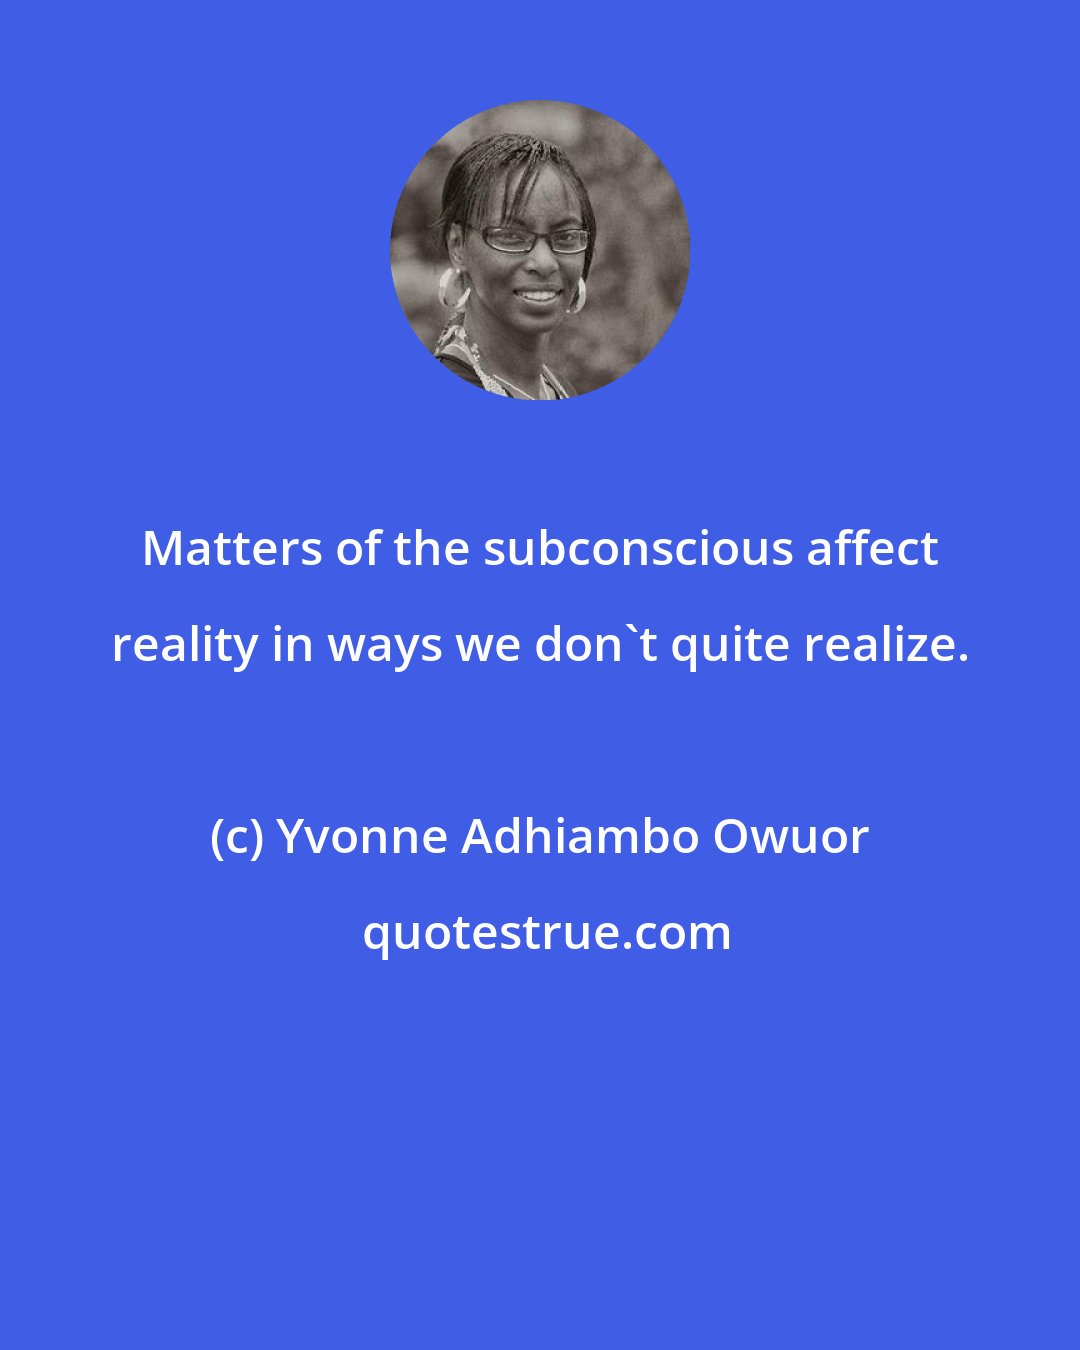 Yvonne Adhiambo Owuor: Matters of the subconscious affect reality in ways we don't quite realize.